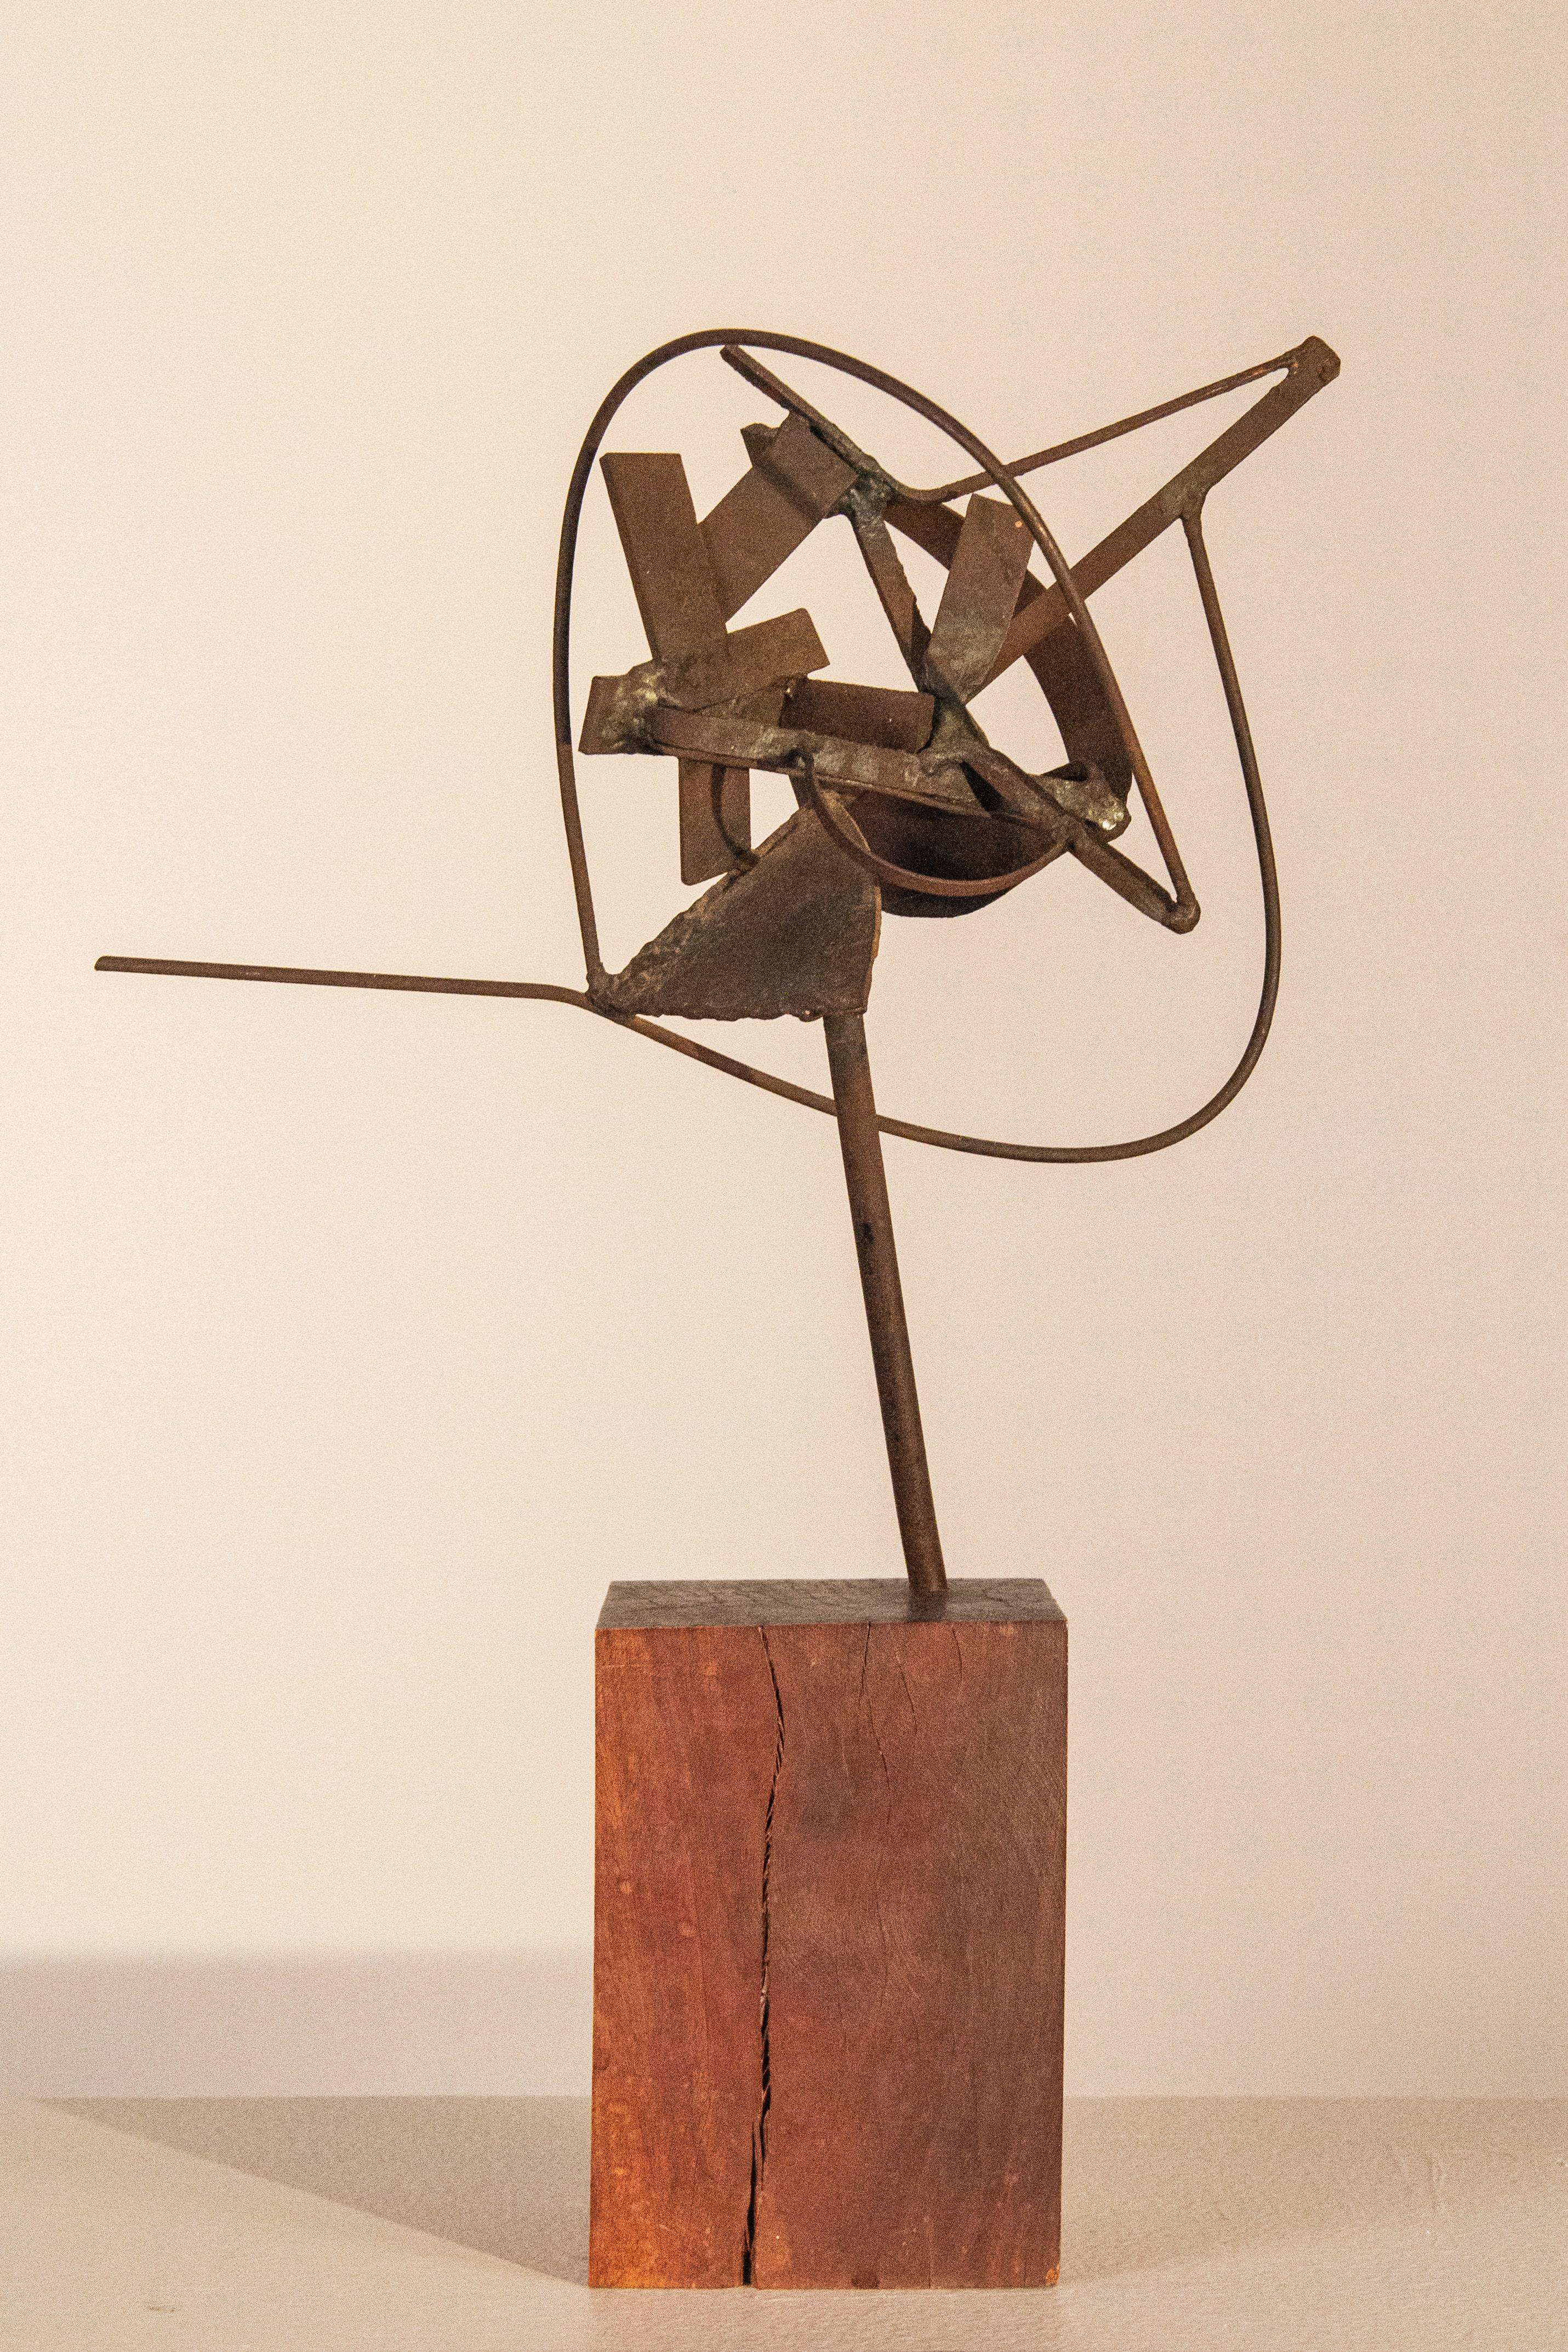 Sidney Gordin
Untitled, 1958
Incised with initials
Welded Steel
15 x 10 1/2 x 6 inches

Provenance:
Eric Firestone Gallery, New York

On October 24, 1918, Sidney Gordin was born in Chelyabinsk, Russia. He spent his early years in Shanghai, China. At